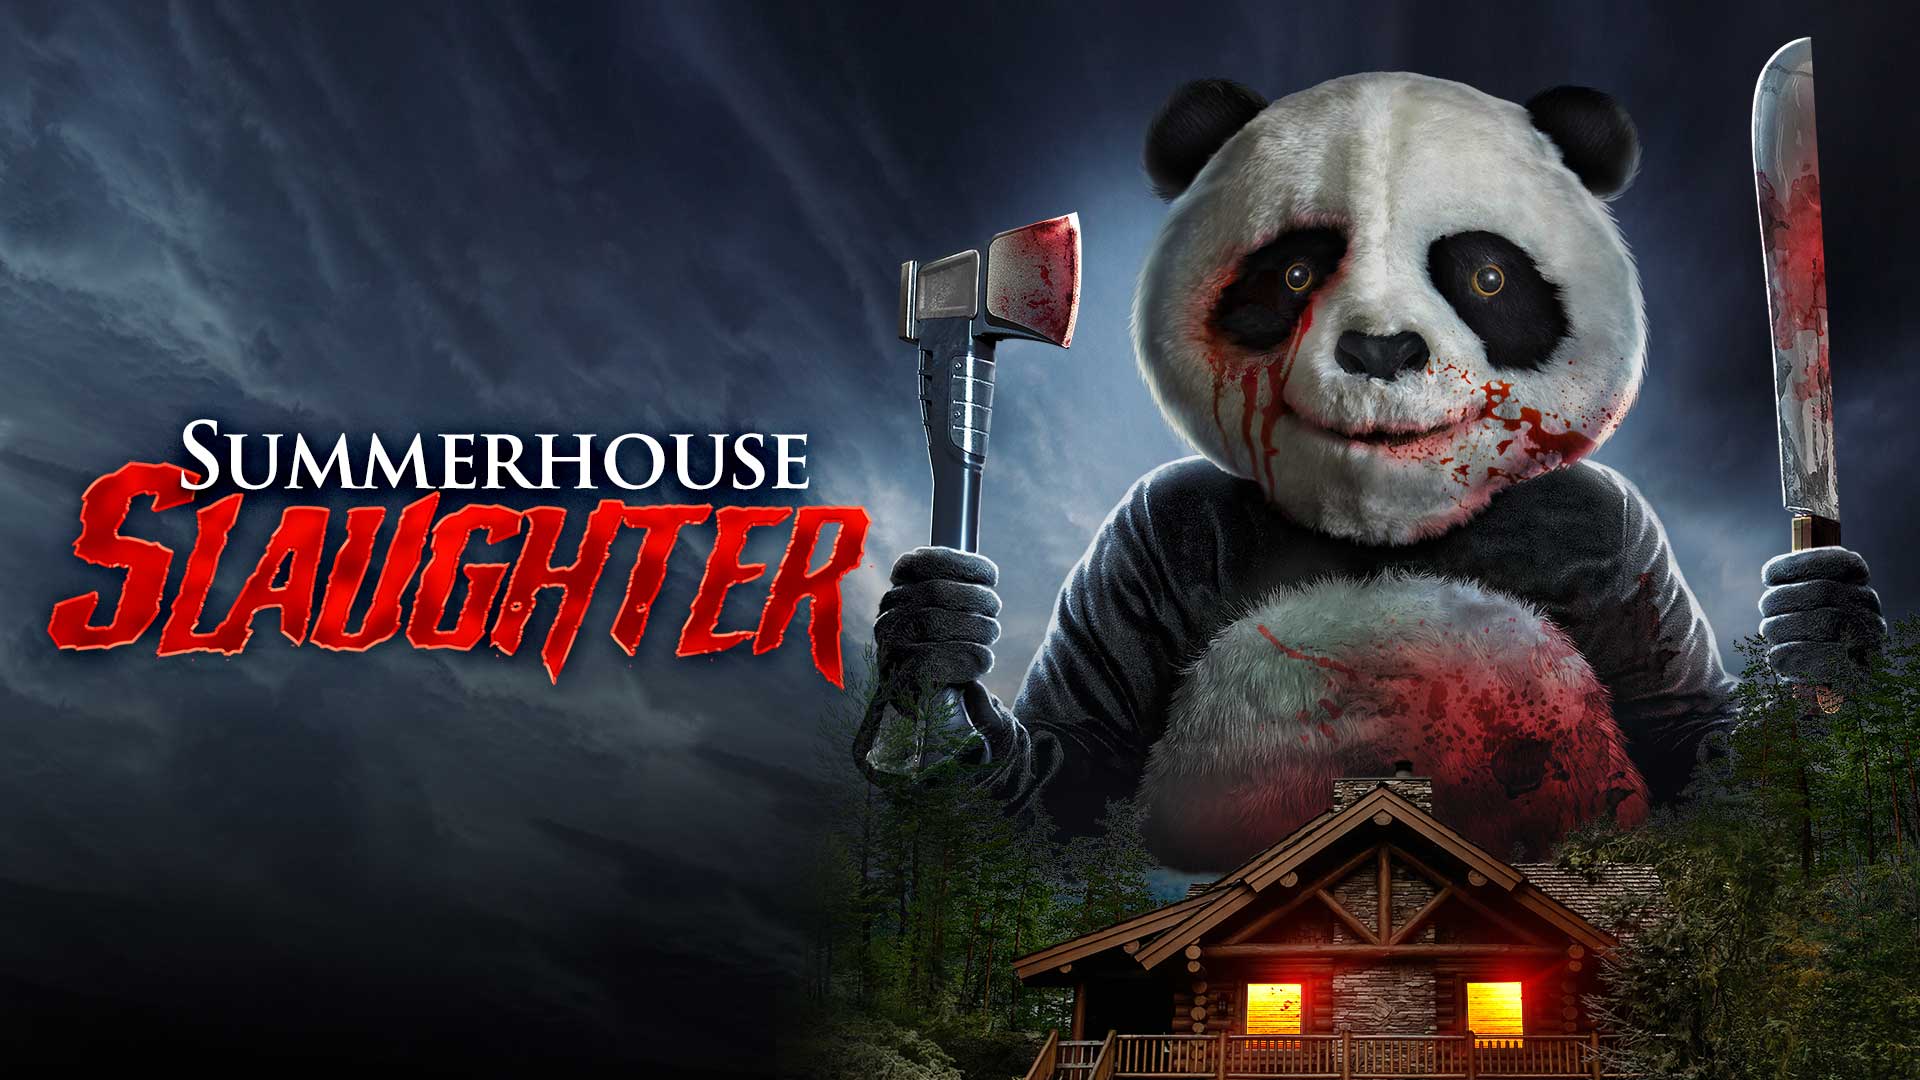 Summerhouse Slaughter | Official Trailer | Watch Movie Free @FlixHouse